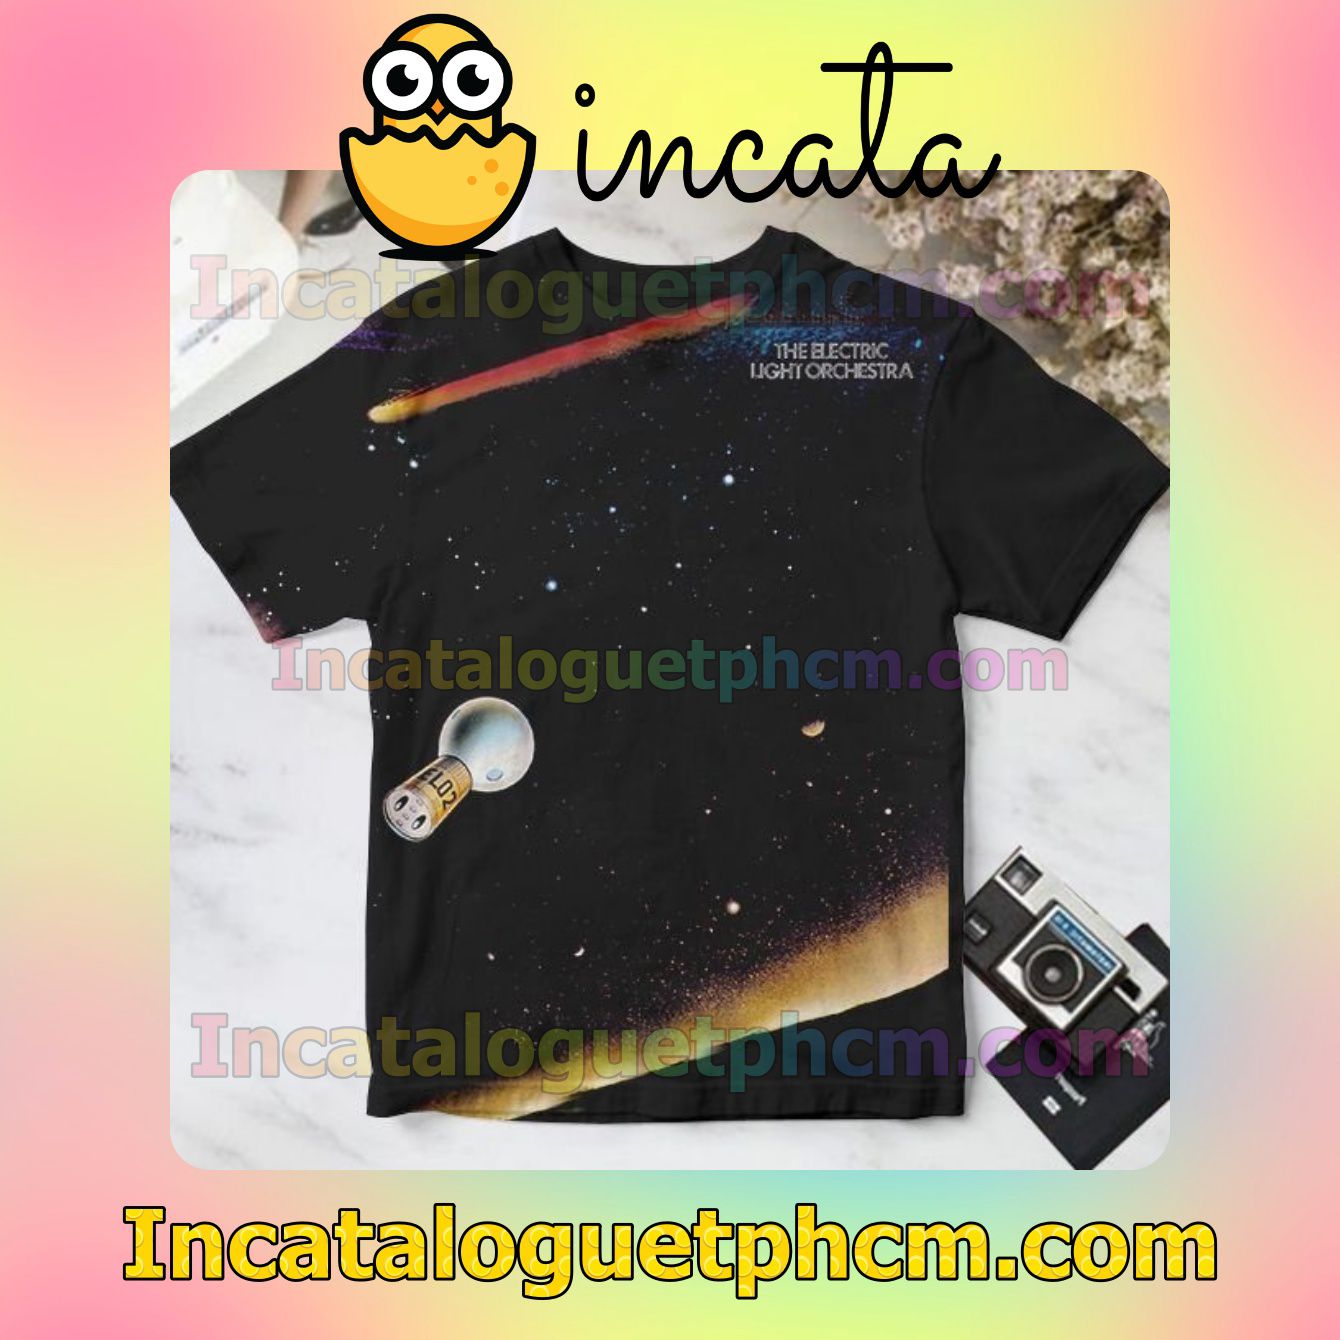 Electric Light Orchestra Elo 2 Album Cover Personalized Shirt